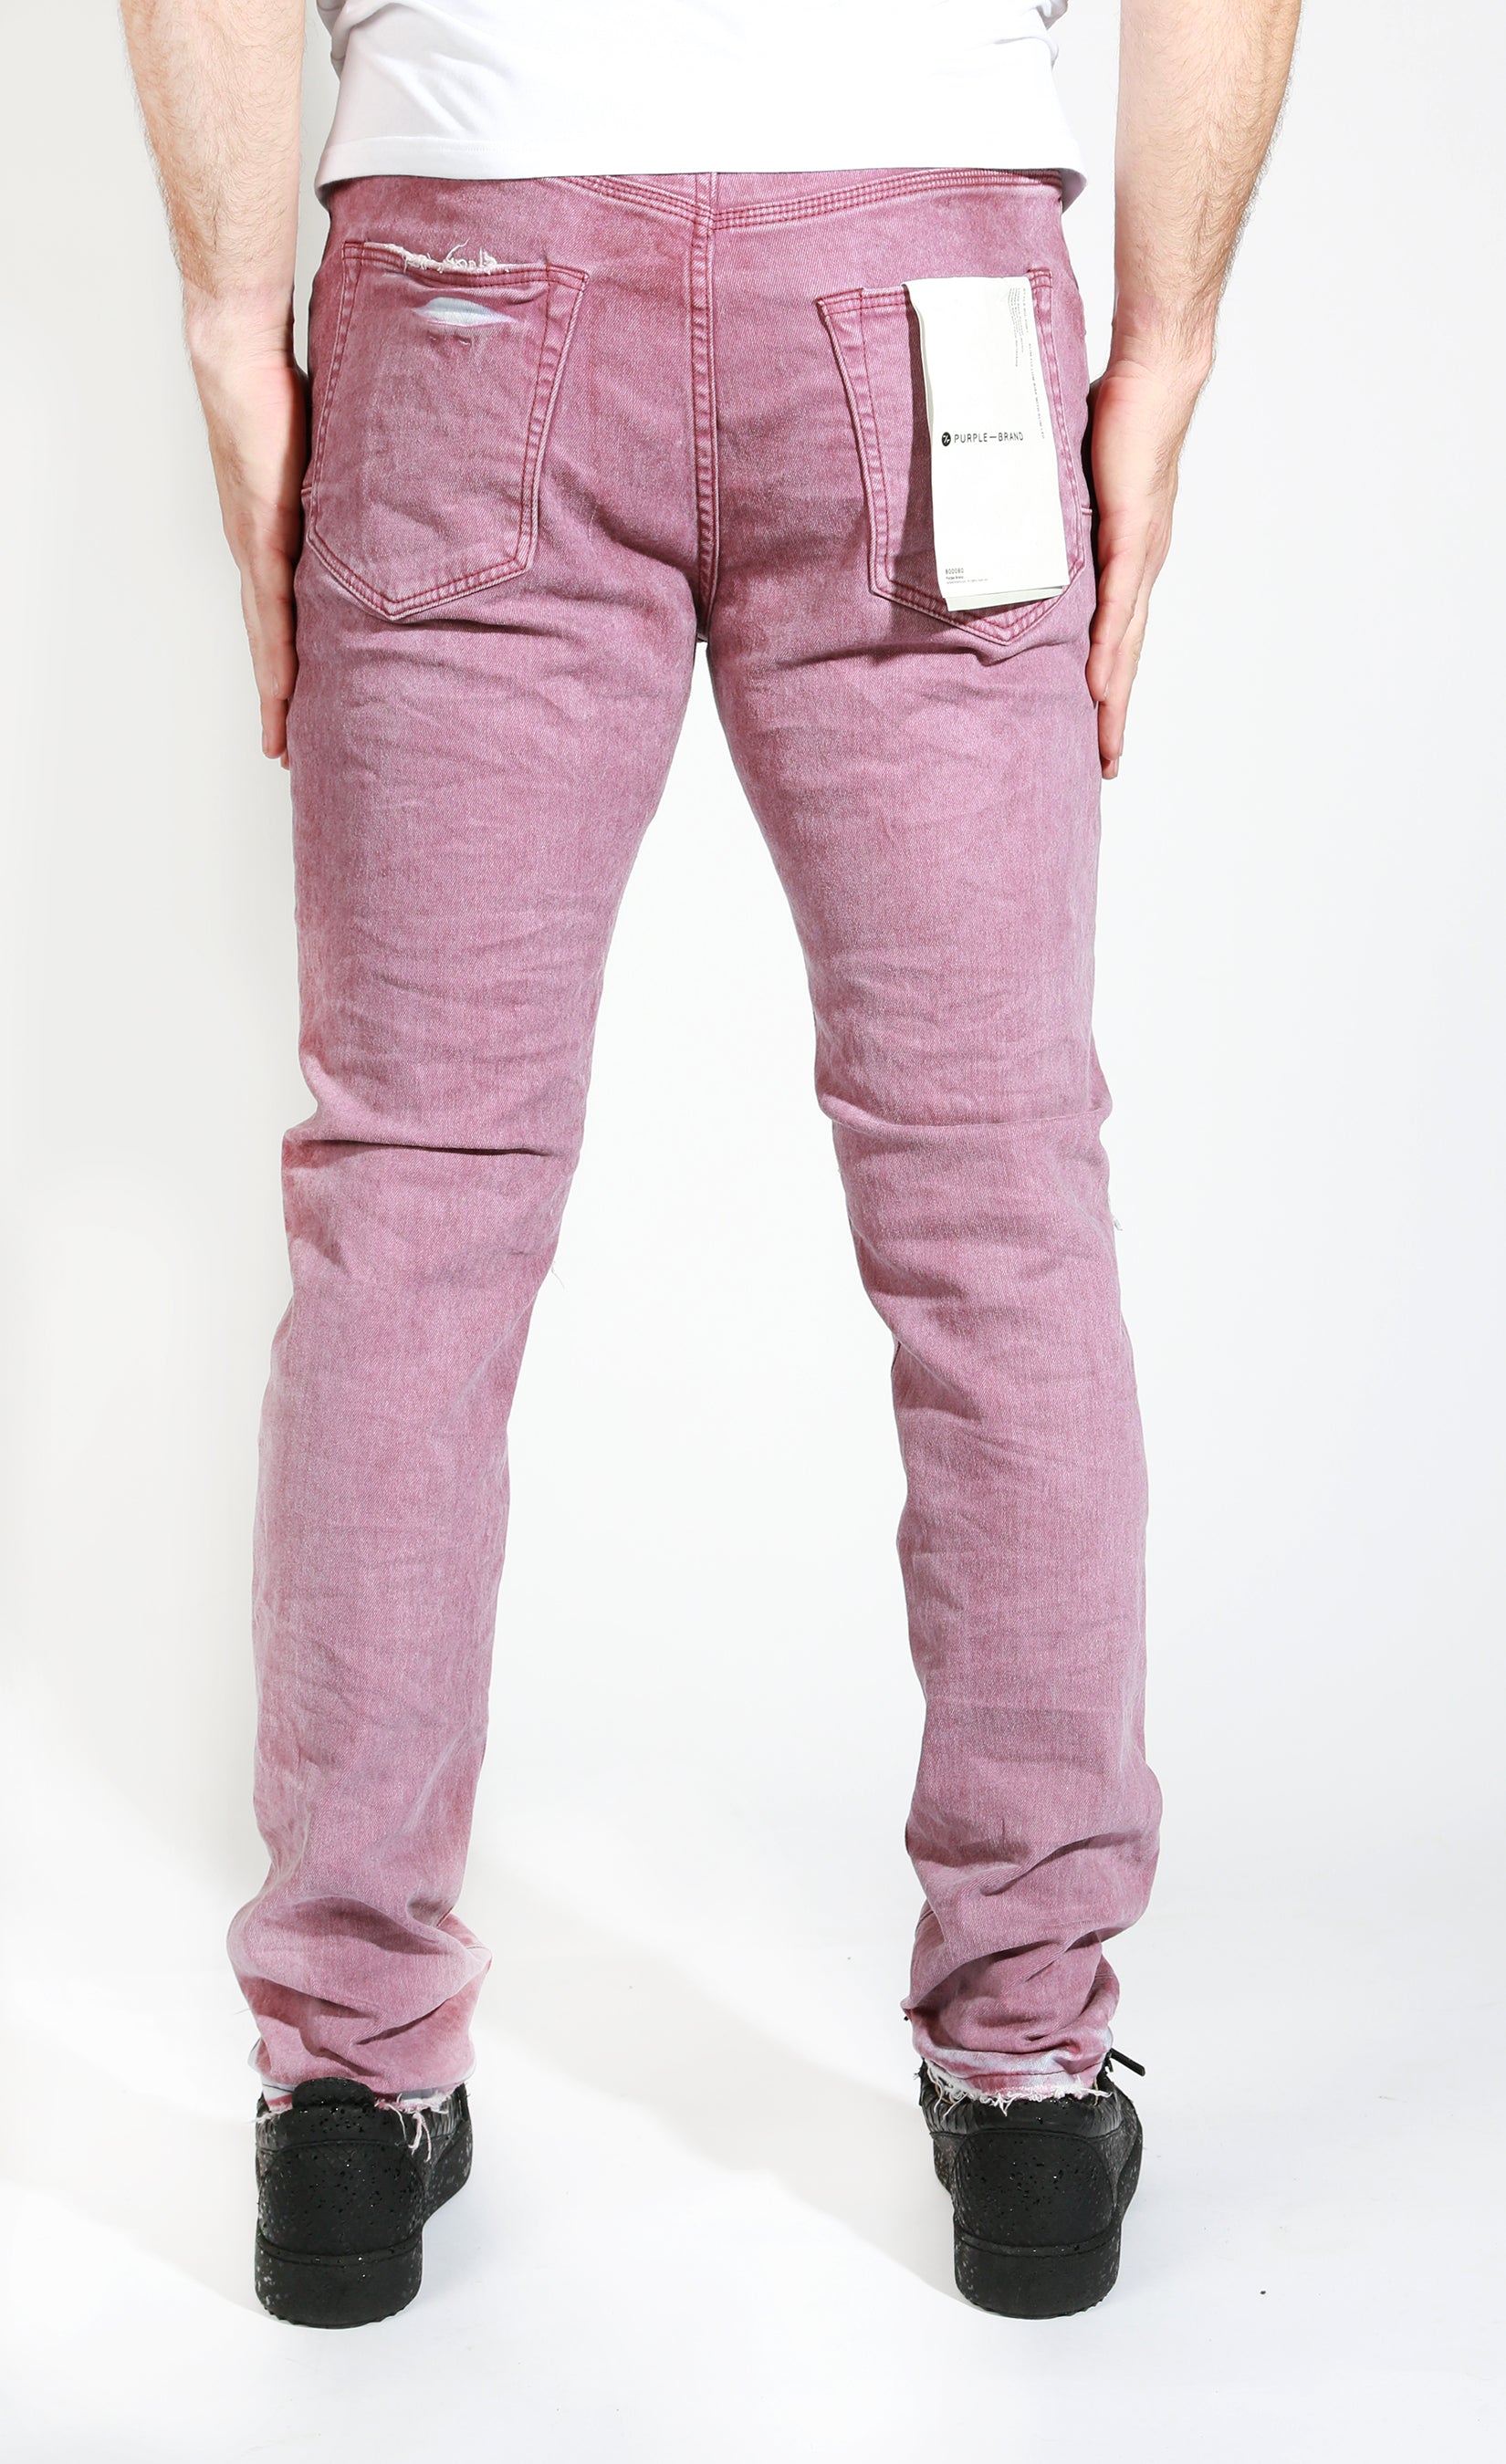 Men's Purple Brand Tapered jeans from $200